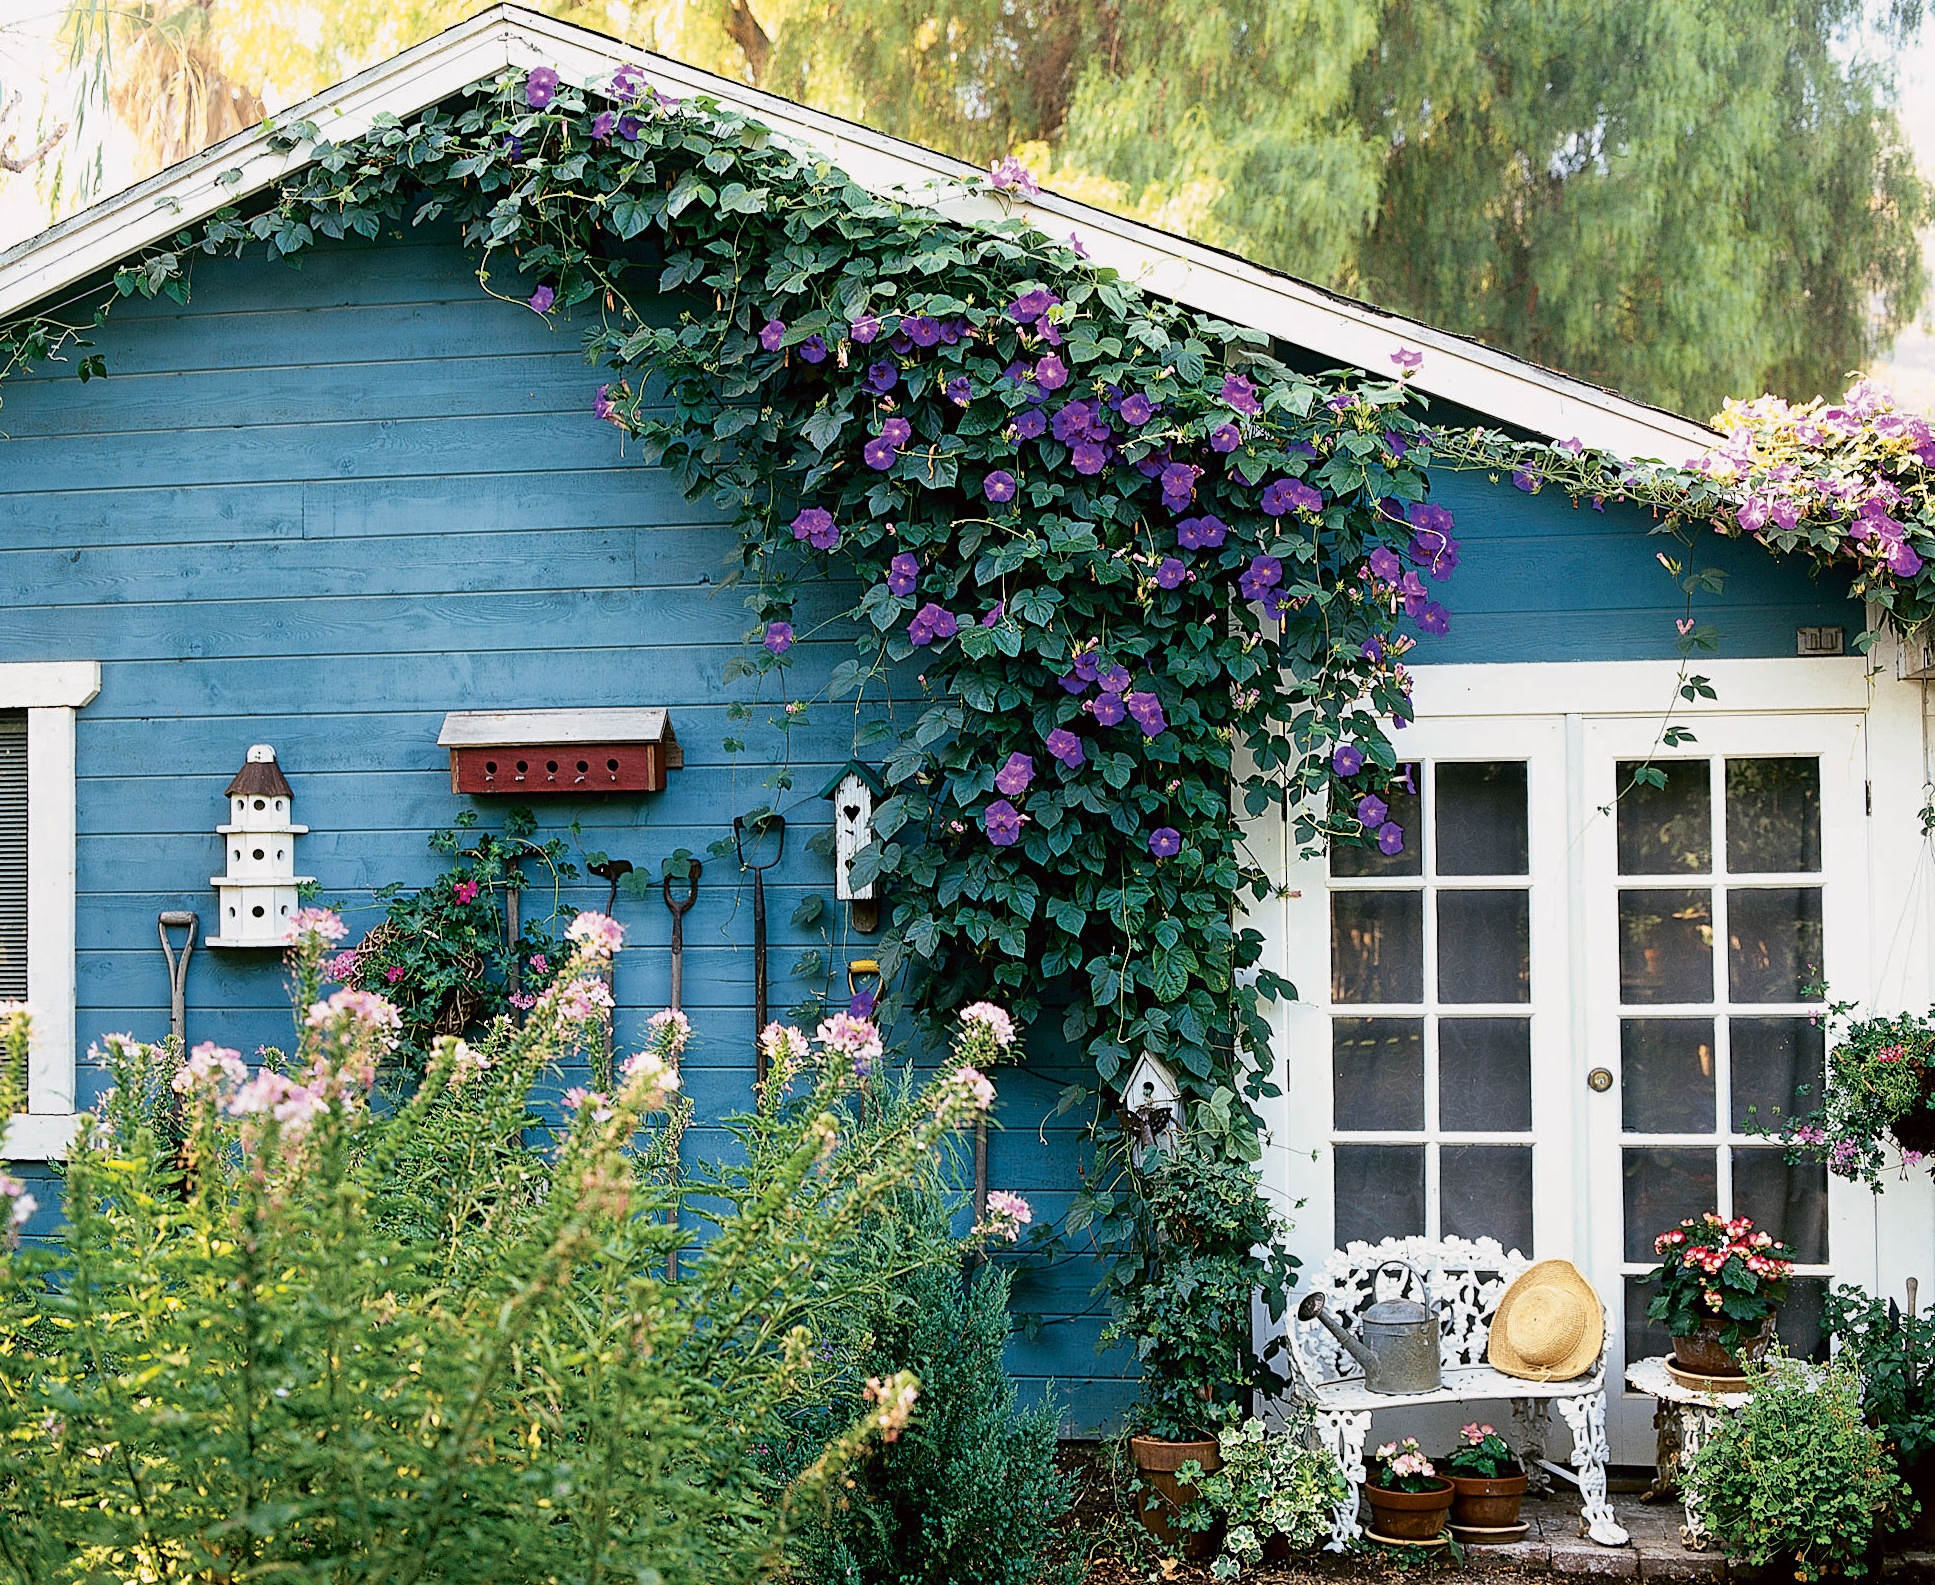 How to Use Morning Glory Vines